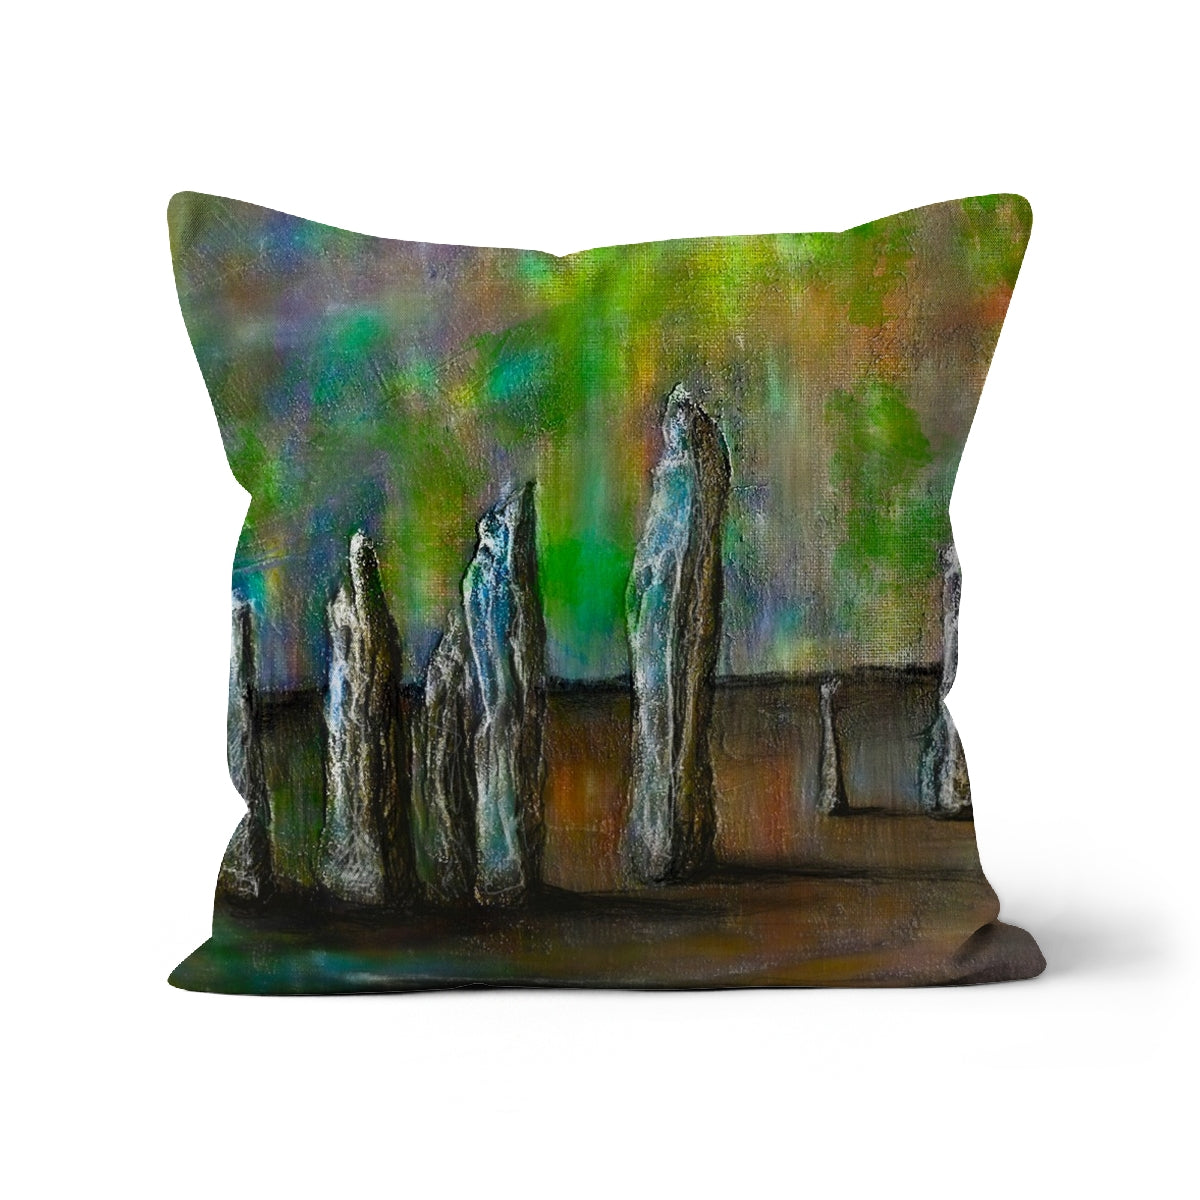 Callanish Northern Lights Art Gifts Cushion-Cushions-Hebridean Islands Art Gallery-Canvas-12"x12"-Paintings, Prints, Homeware, Art Gifts From Scotland By Scottish Artist Kevin Hunter